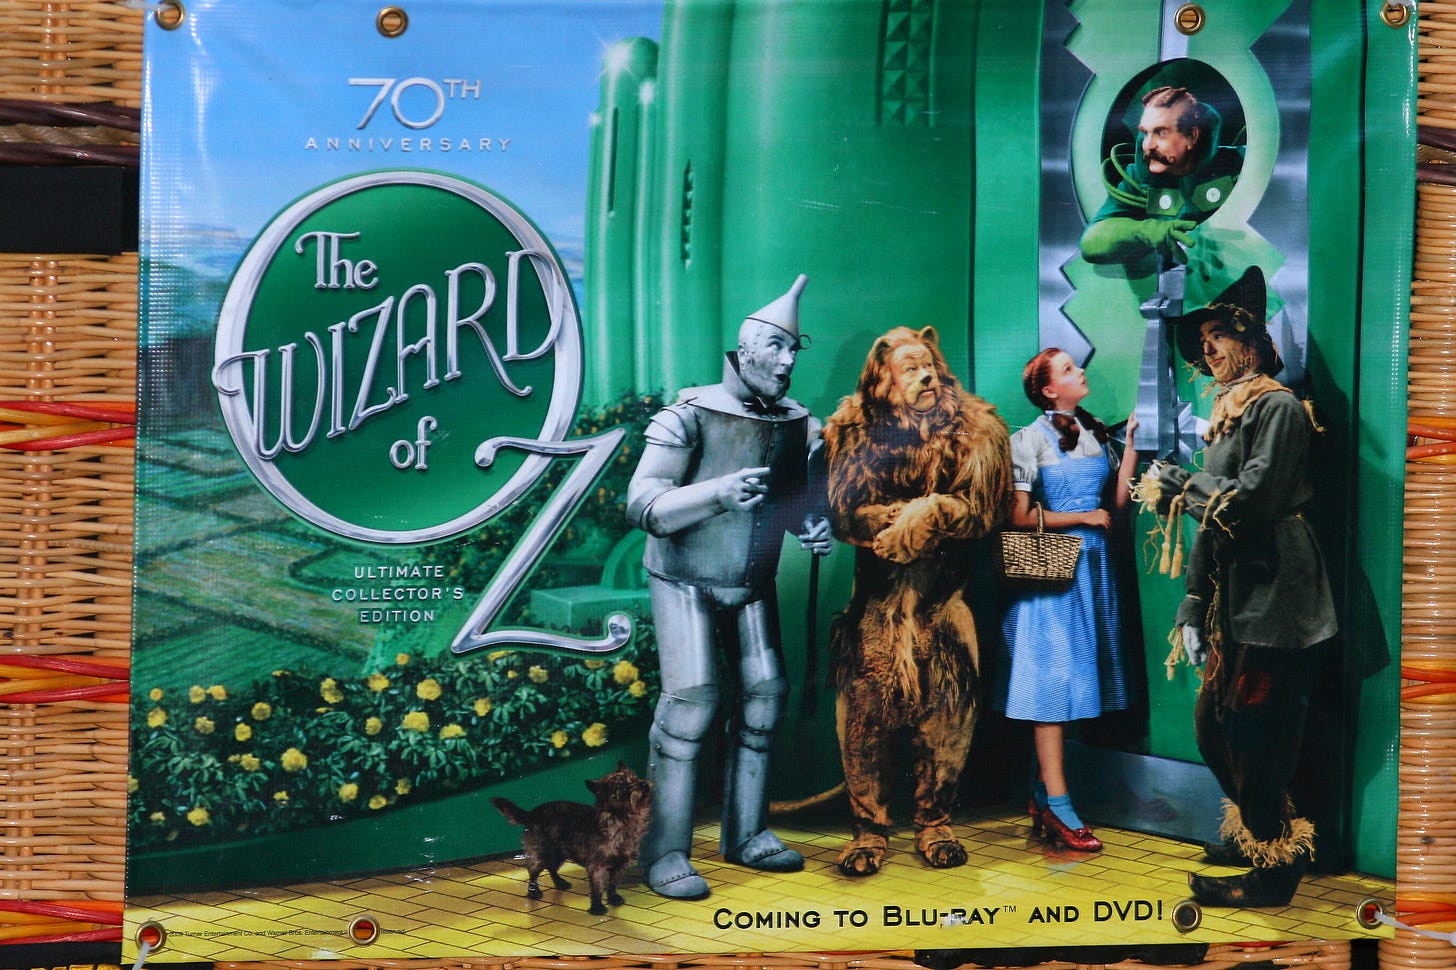 Wizard of Oz poster